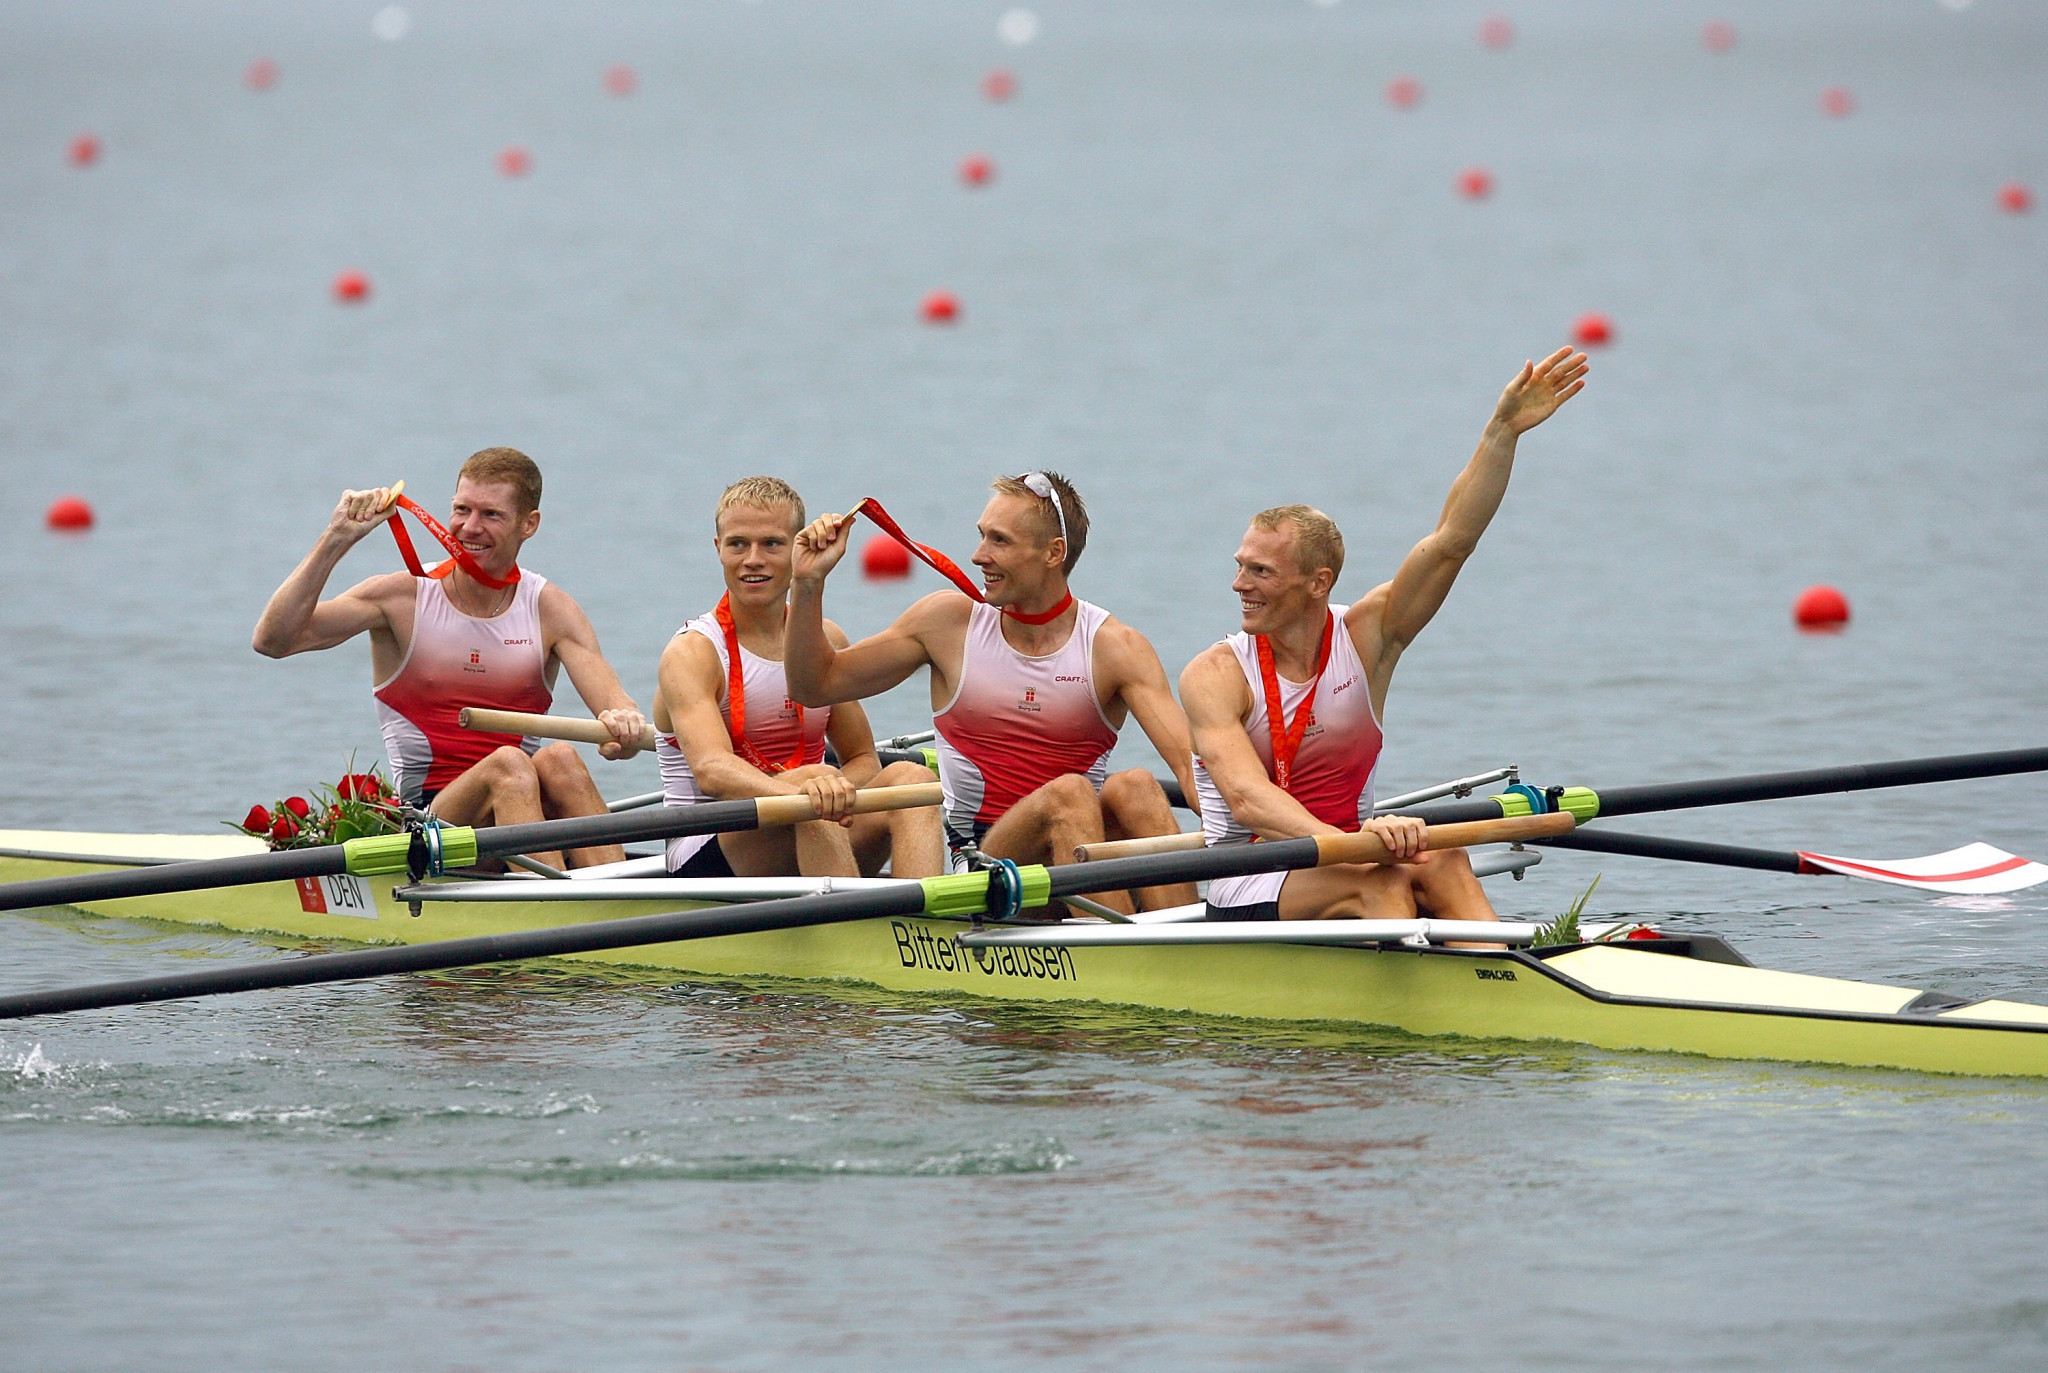 Ebbesen was a key member of Denmark's "Golden Four" that achieved three men's Olympic lightweight four gold medals ©Getty Images